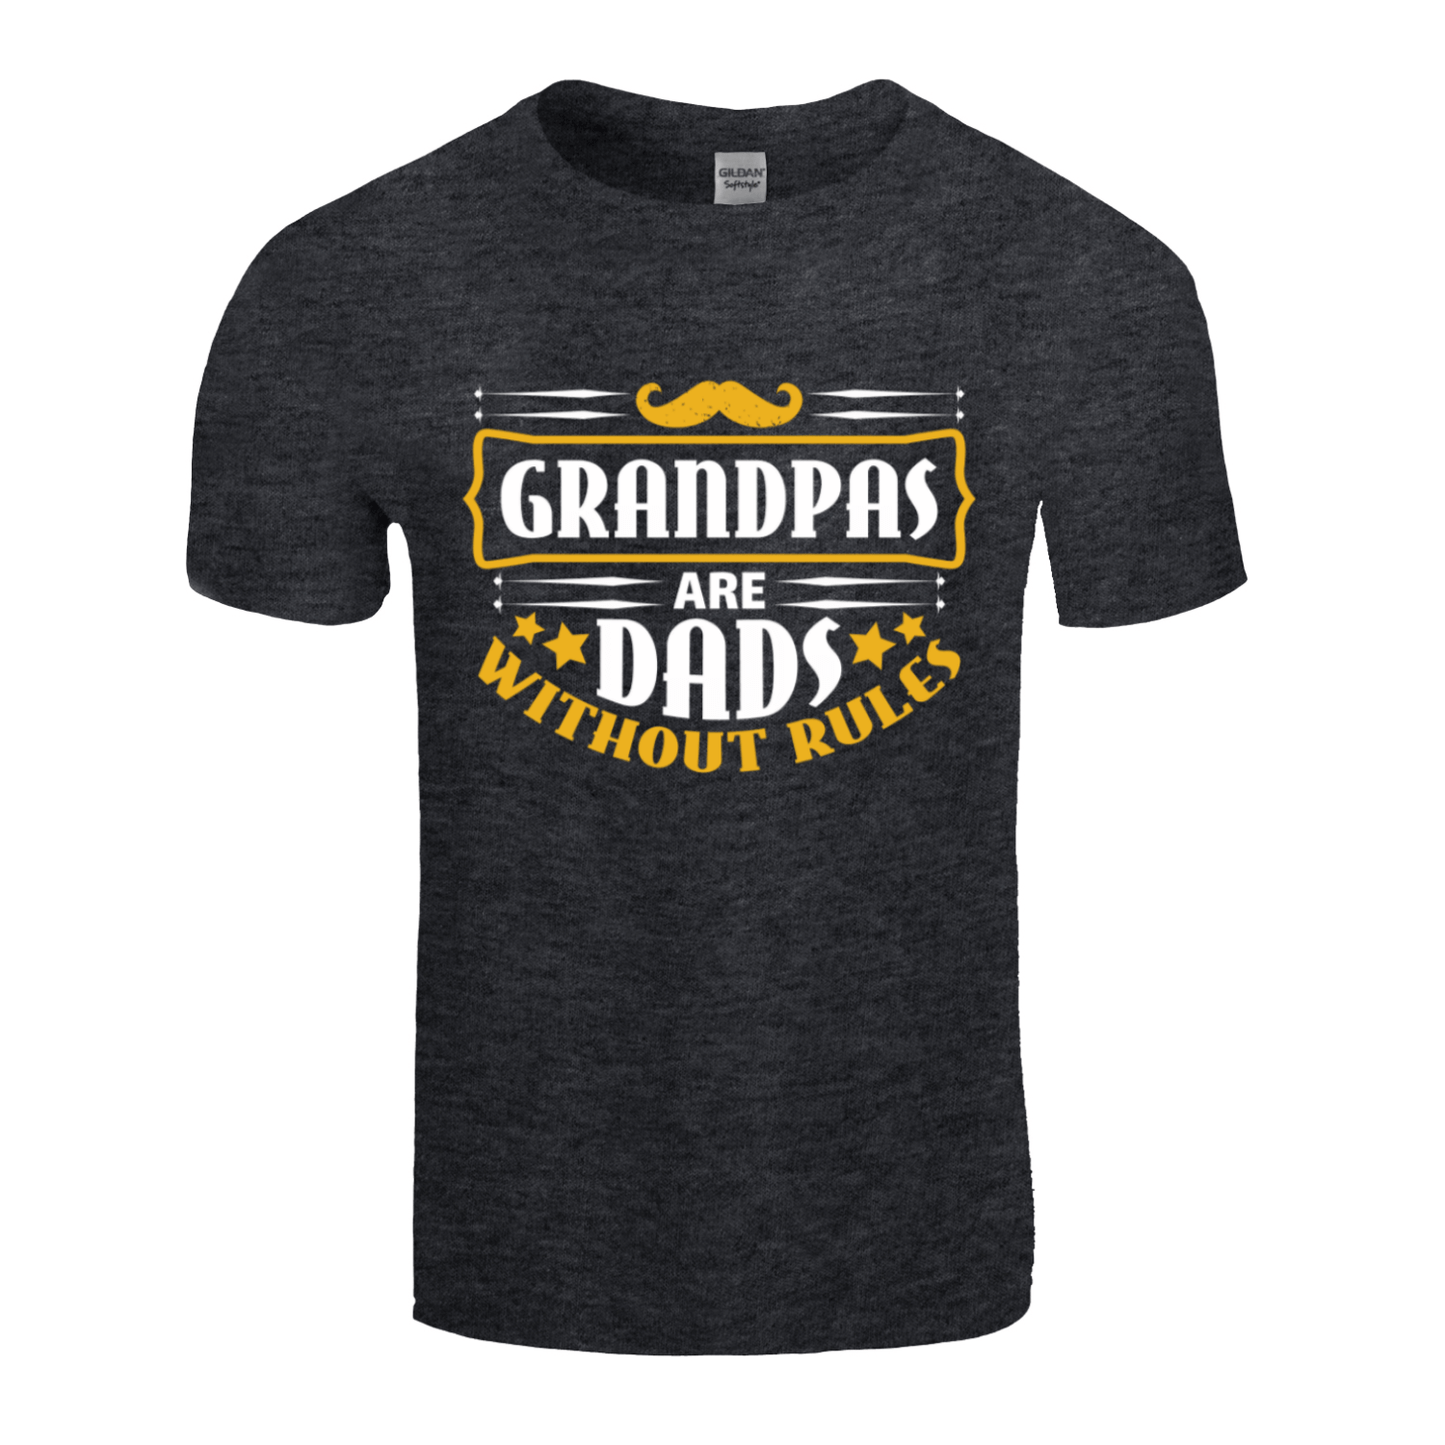 Celebrate Grandpa's Love With A Touch Of Humor - Grandpas Are Dads Without Rules T-Shirt